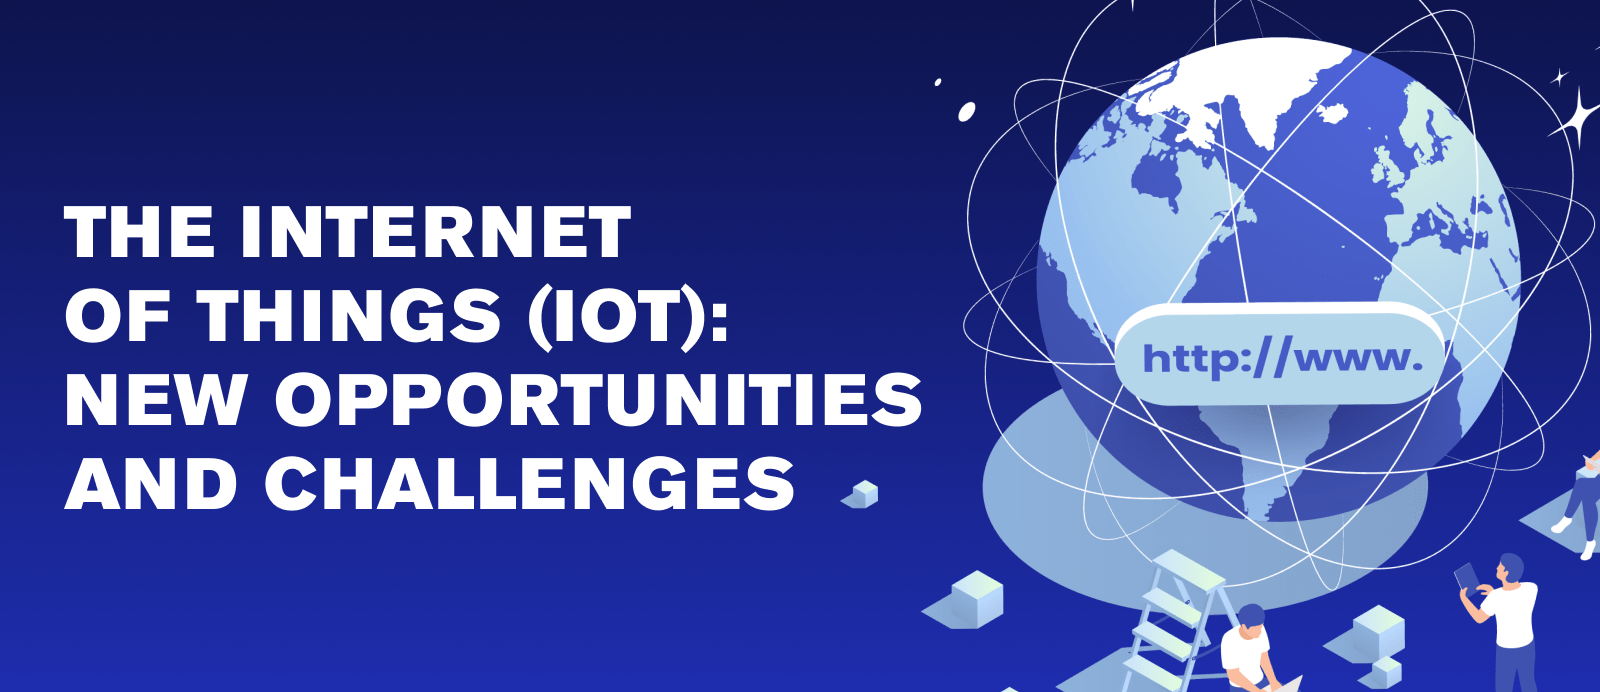 The Internet of Things (IoT): New Opportunities and Challenges